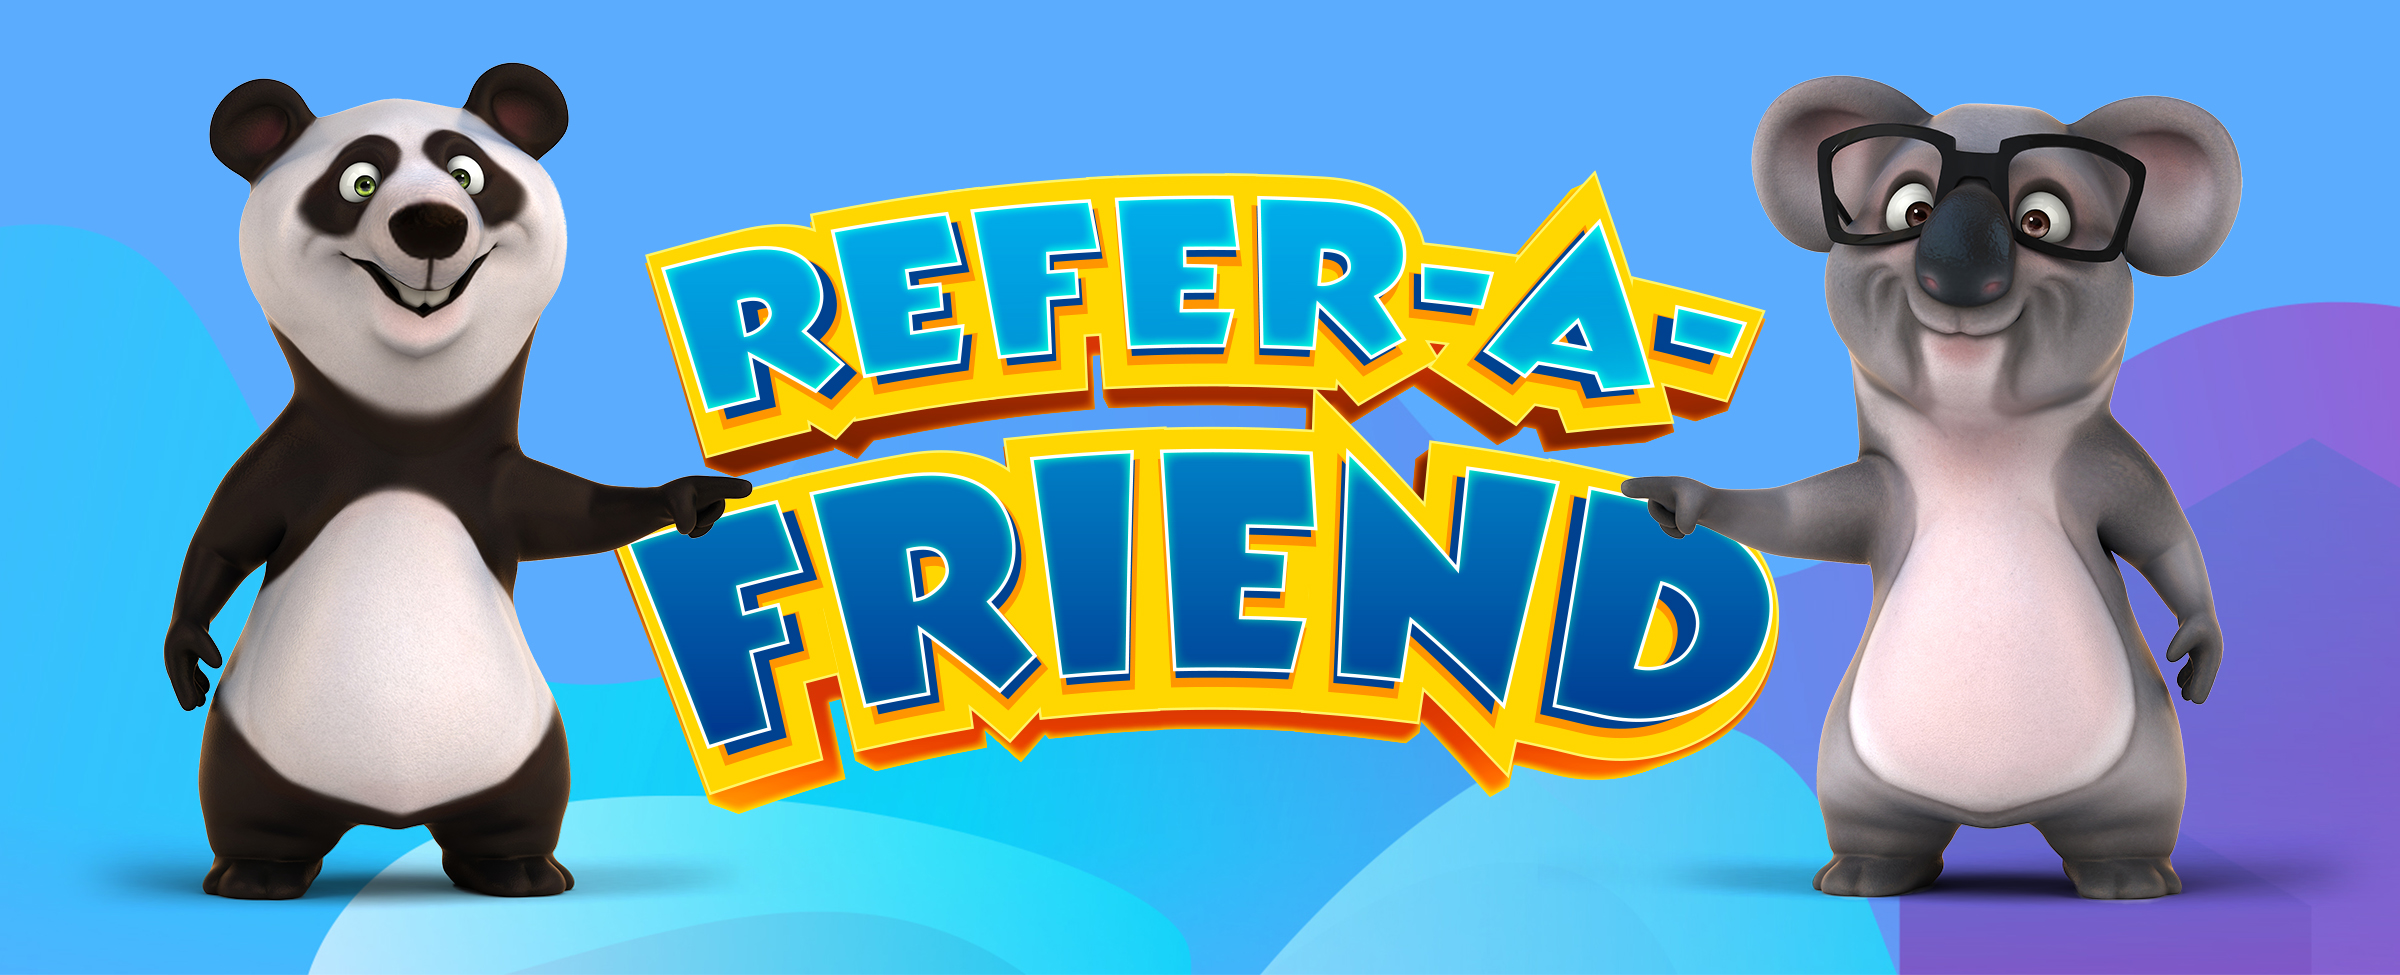 Did you know that refer a friend is another bonus on offer at SlotsLV? Read on to find out how you, and your squad can benefit from this offer!